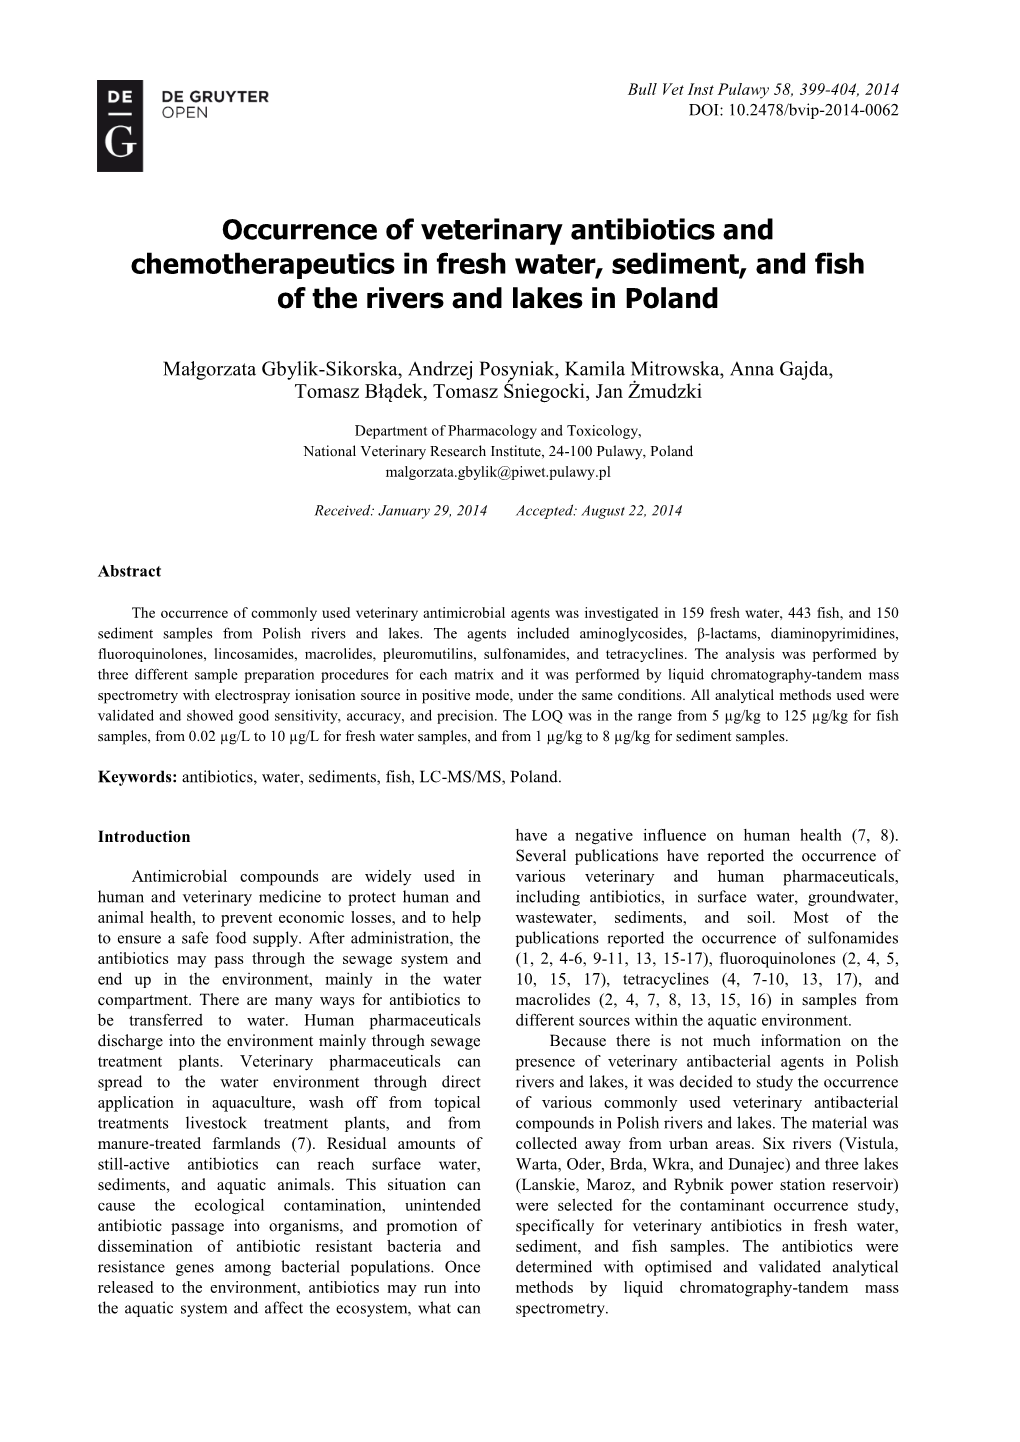 Occurrence of Veterinary Antibiotics and Chemotherapeutics in Fresh Water, Sediment, and Fish of the Rivers and Lakes in Poland